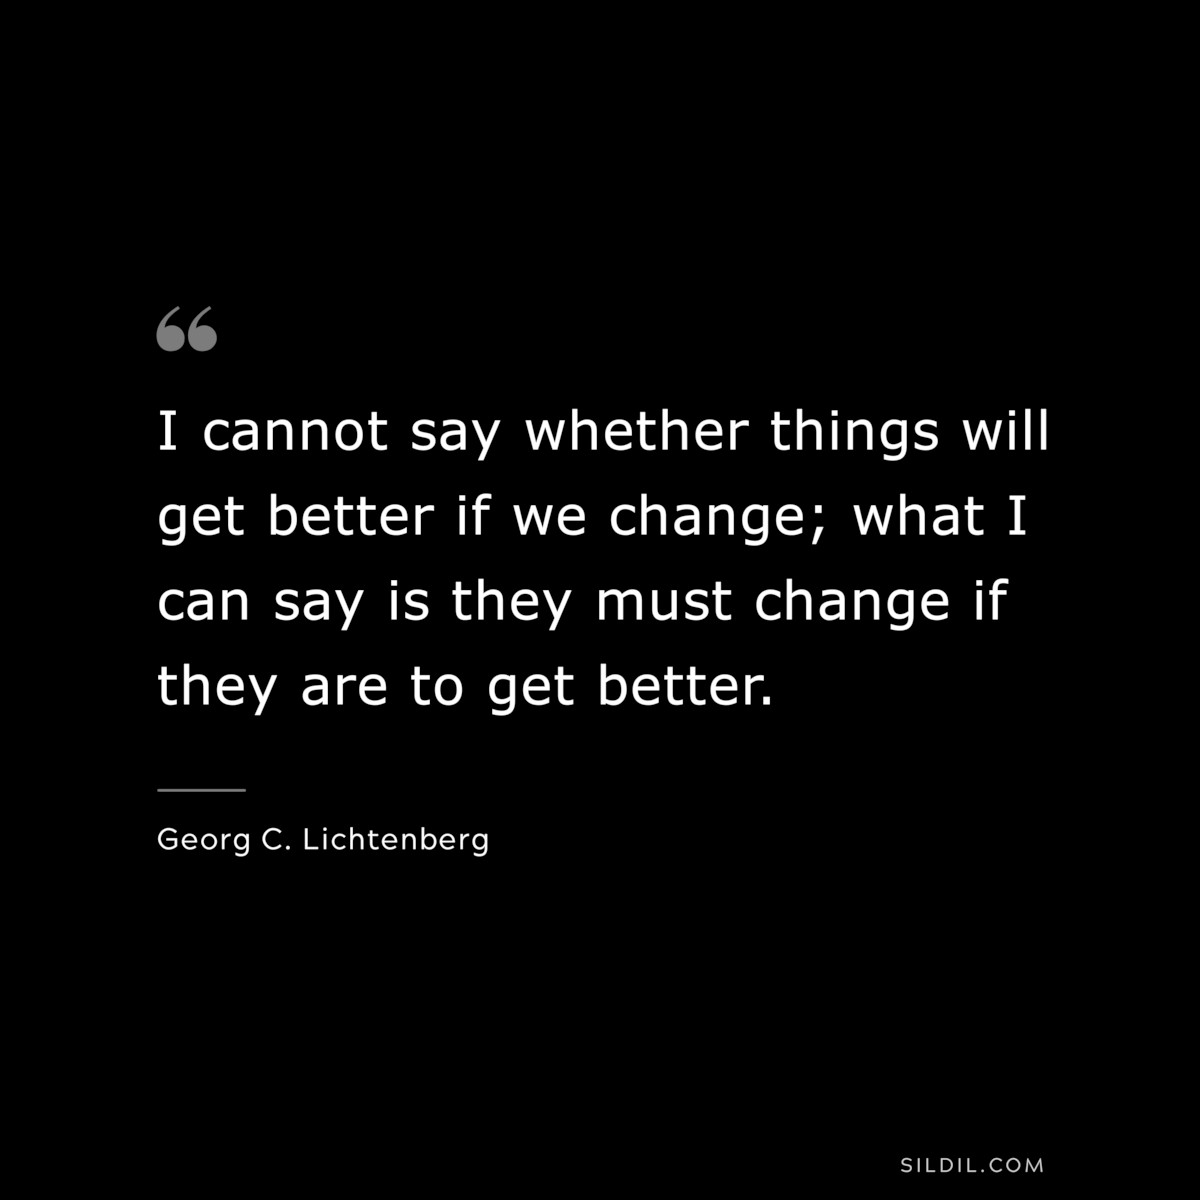 I cannot say whether things will get better if we change; what I can say is they must change if they are to get better. ― Georg C. Lichtenberg